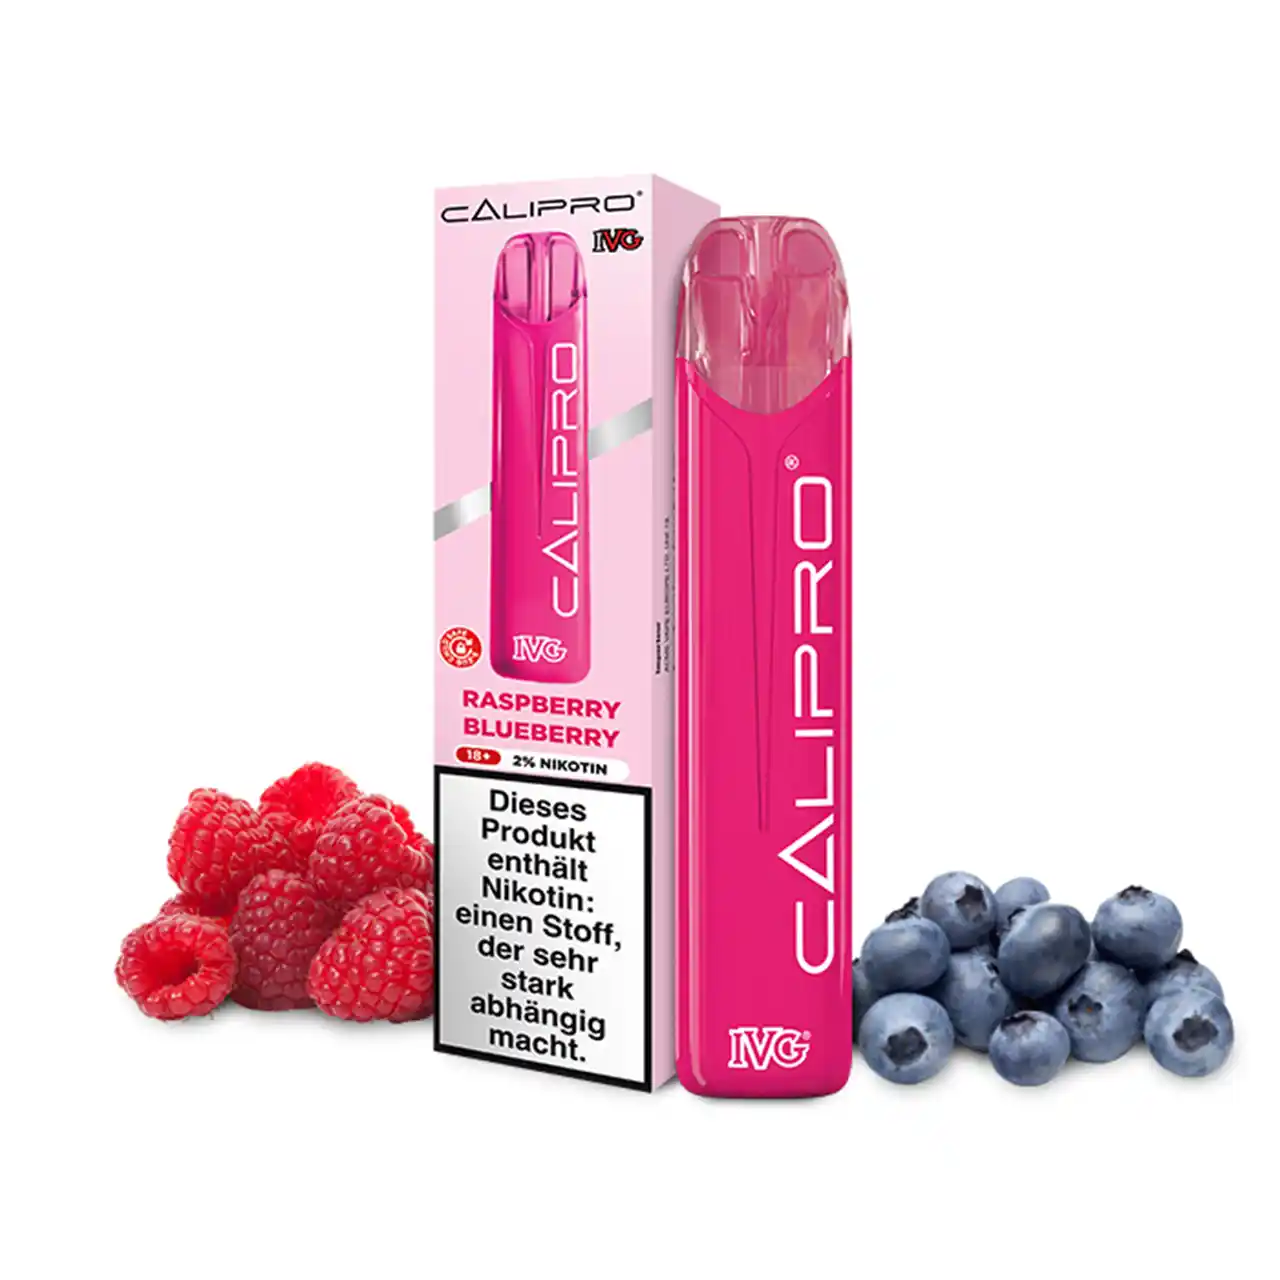 IVG Calipro Raspberry Blueberry mit Verpackung